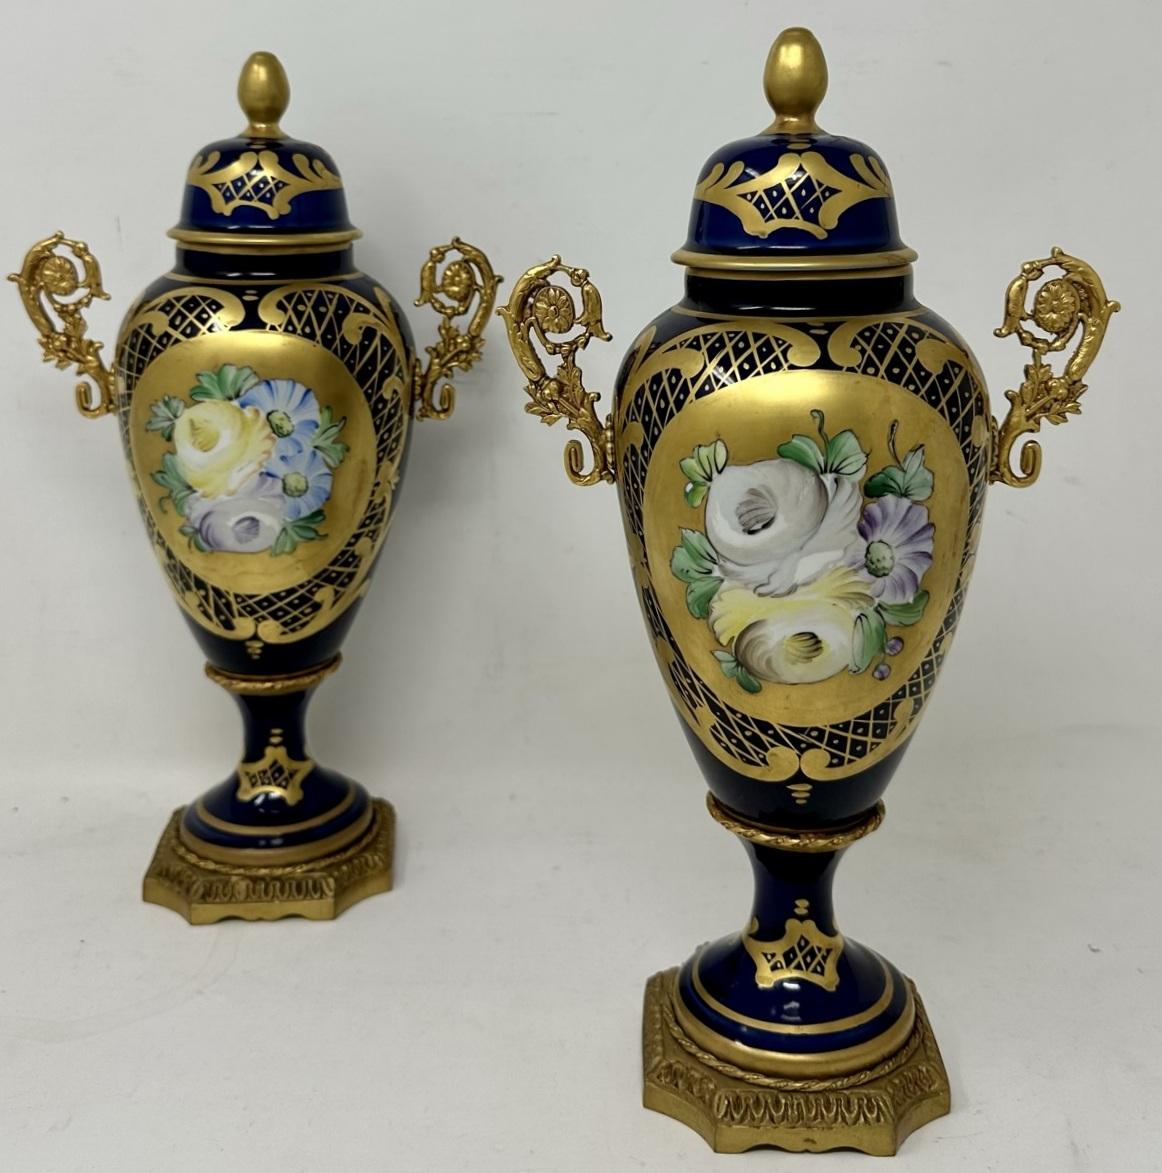 Stunning Pair of French Limoges Hard Paste Enameled Porcelain and Ormolu Twin Handle Table or Mantle Urns of traditional urn form and of outstanding quality, and good size proportions, each raised on a square stepped base with canted corners.